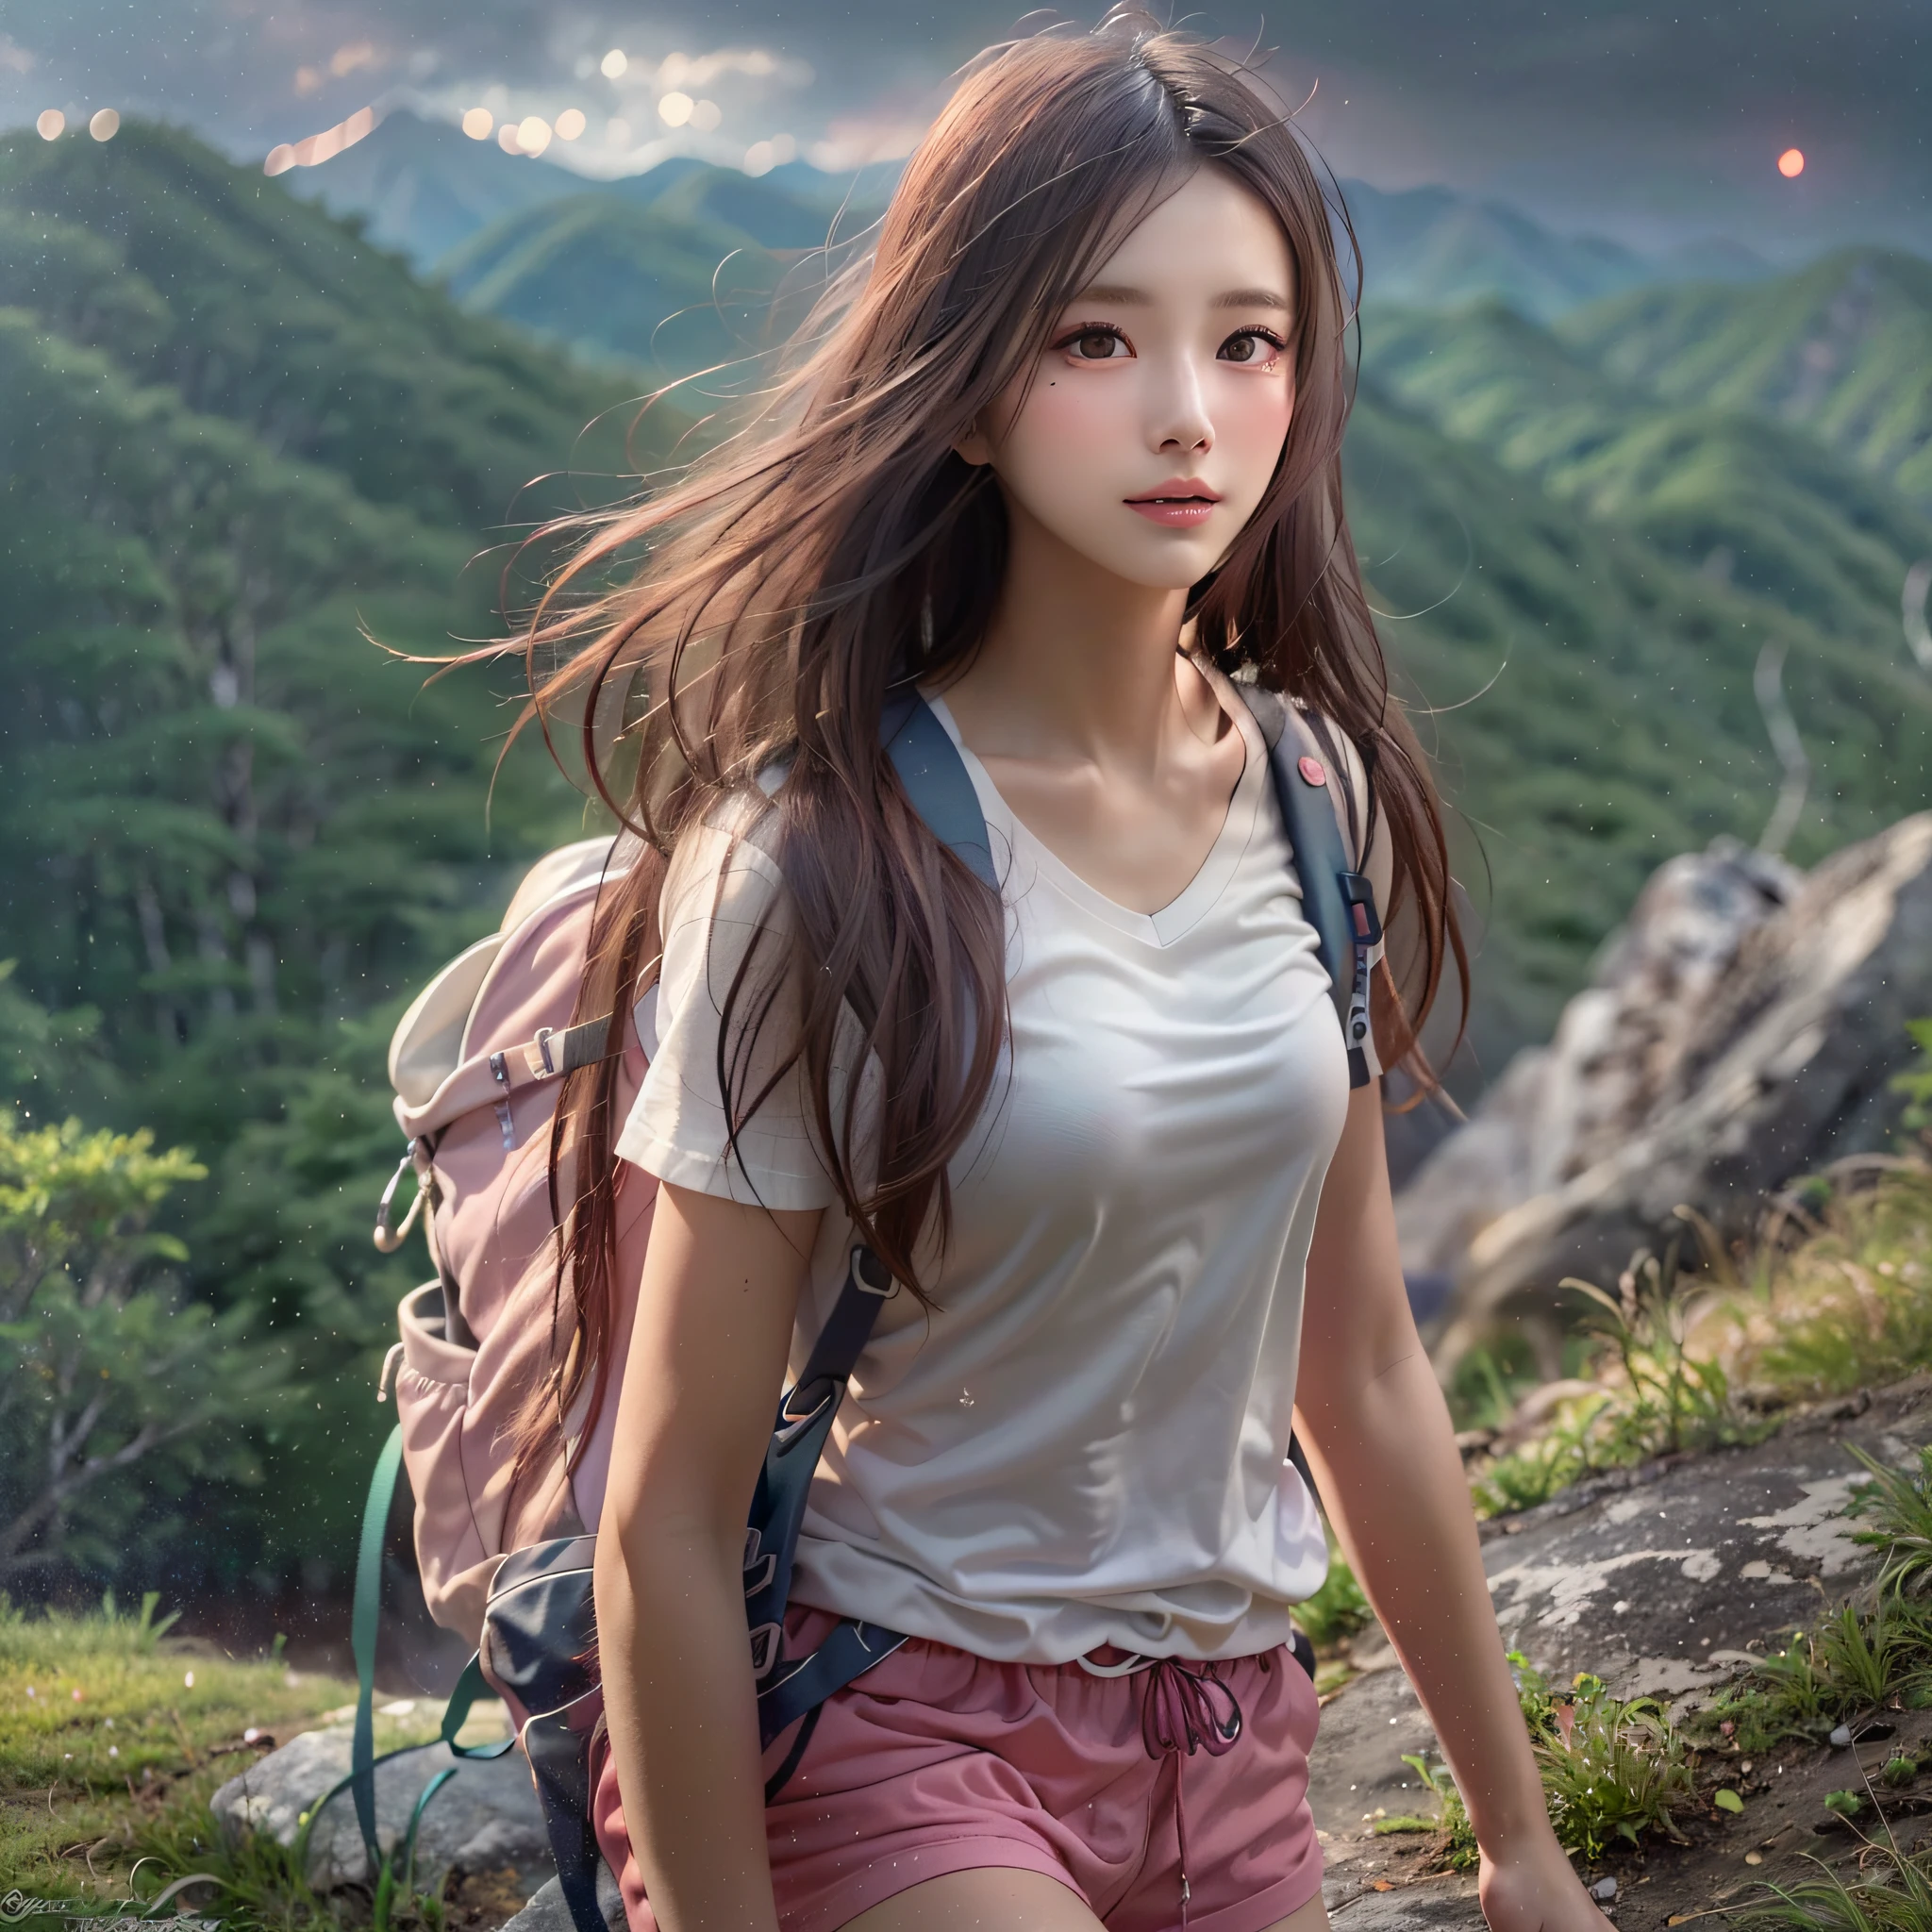 (Naturescape photography), (best quality), masterpiece:1.2, ultra high res, photorealistic:1.4, RAW photo, (Magnificent mountain, sea of clouds), (On a very high mountain peak), (sunset), (wideangle shot),  (Show cleavage:0.8),
(1girl), (Photo from the knee up:1.3), (18 years old), (smile:1.2), (shiny skin), (real skin), (semi-long hair, dark brown hair)
(Large white V-neck T-shirt, pink Trekking shorts), (Carrying a large backpack), 
(ultra detailed face), (ultra Beautiful fece), (ultra detailed eyes), (ultra detailed nose), (ultra detailed mouth), (ultra detailed arms), (ultra detailed body), pan focus, looking at the audience, Colored leaves